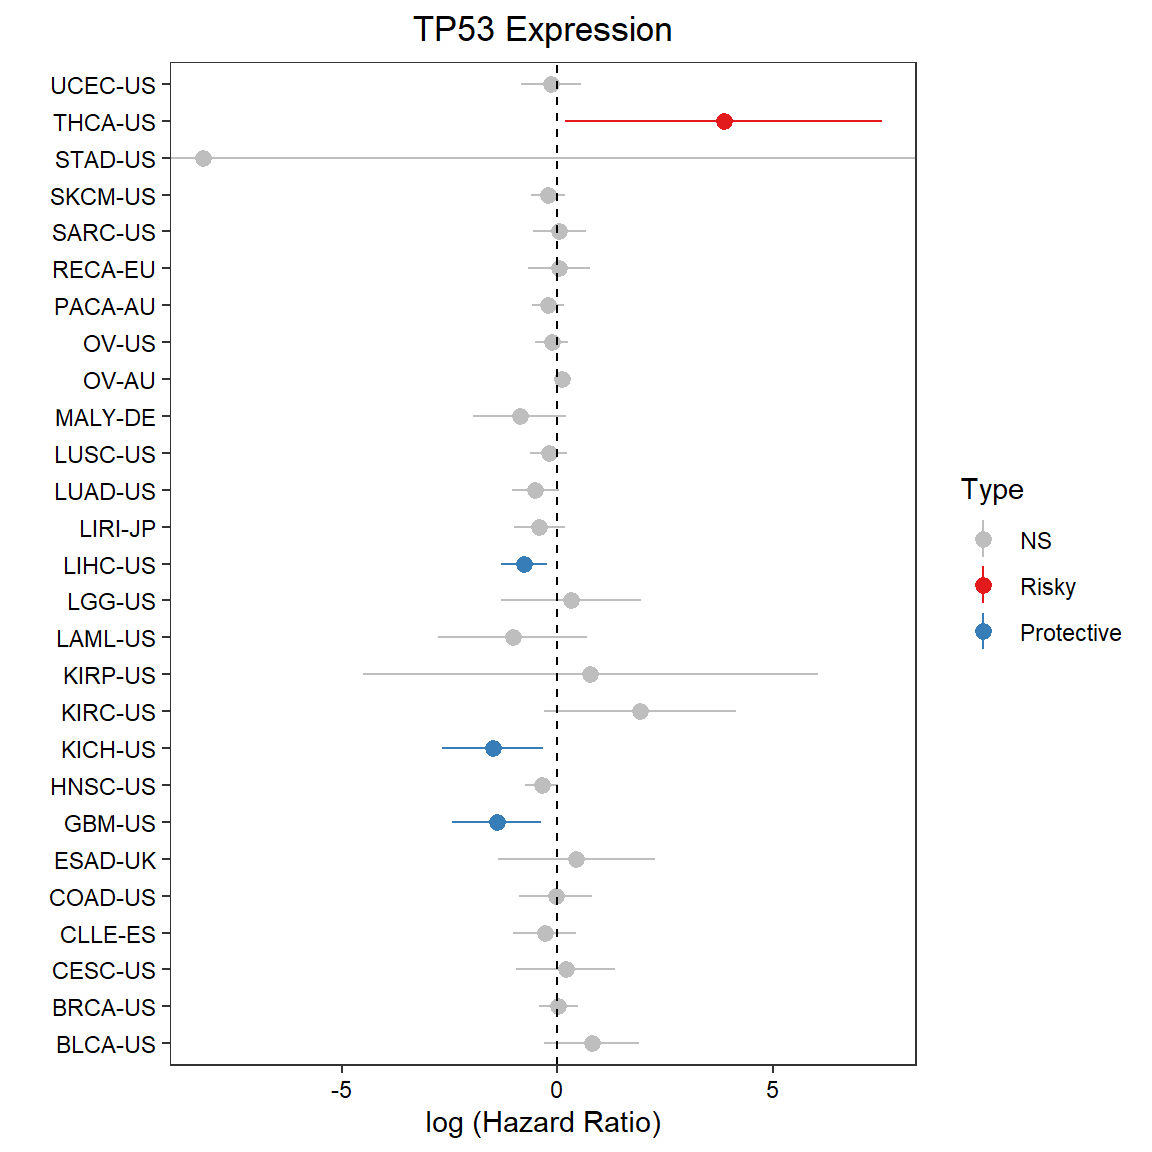 The Cox regression analysis (OS) of mRNA TP53 across pan-cancers